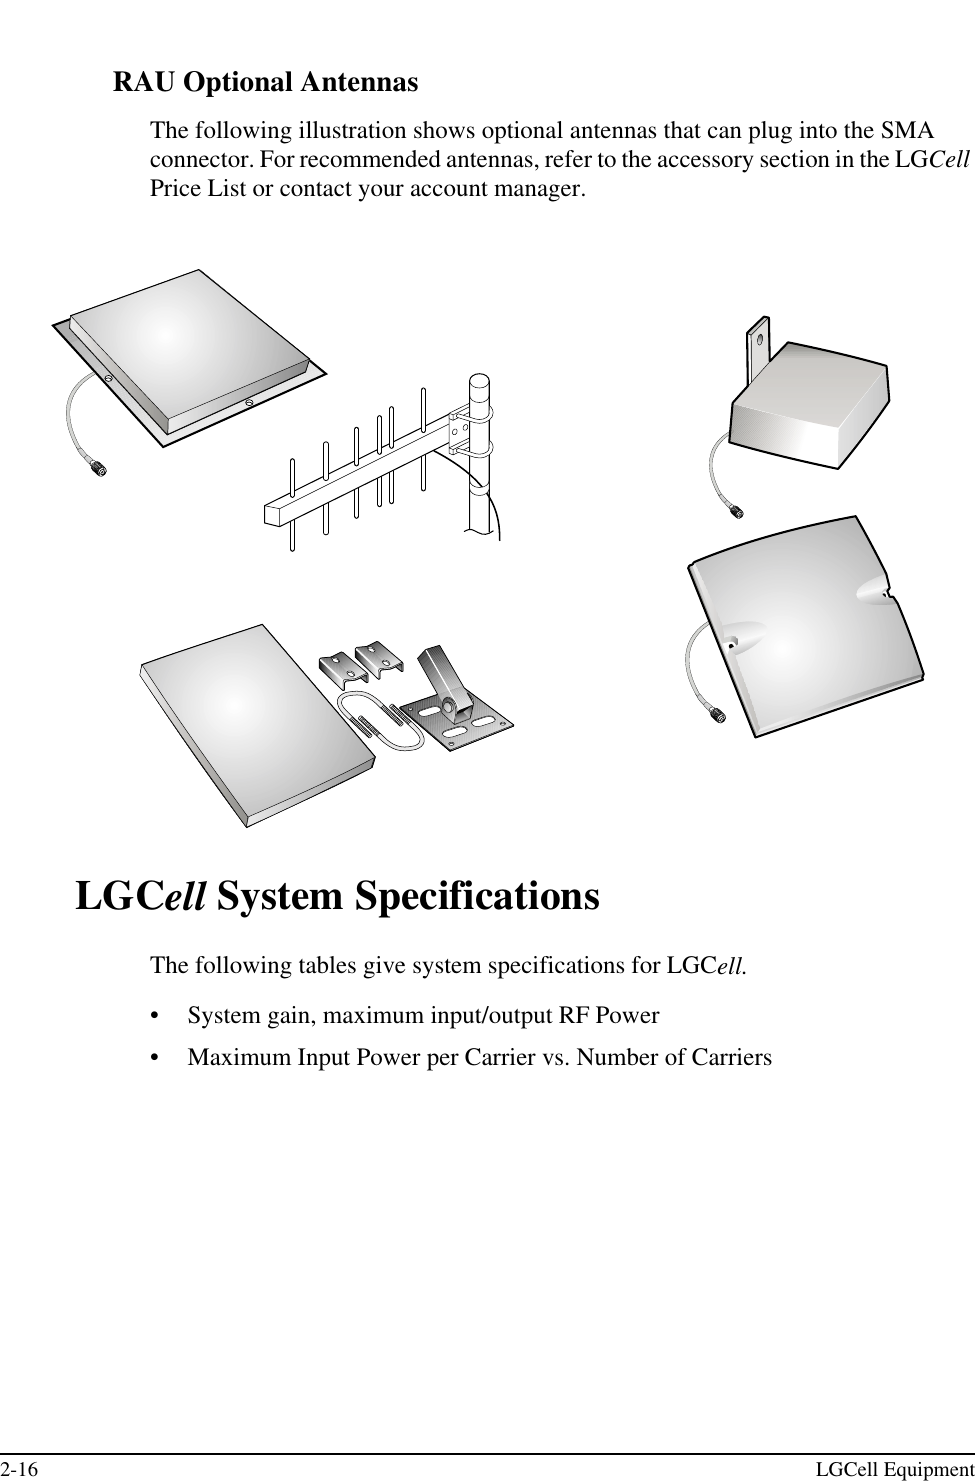 2-16 LGCell EquipmentRAU Optional AntennasThe following illustration shows optional antennas that can plug into the SMA connector. For recommended antennas, refer to the accessory section in the LGCell Price List or contact your account manager.LGCell System SpecificationsThe following tables give system specifications for LGCell.•System gain, maximum input/output RF Power•Maximum Input Power per Carrier vs. Number of Carriers